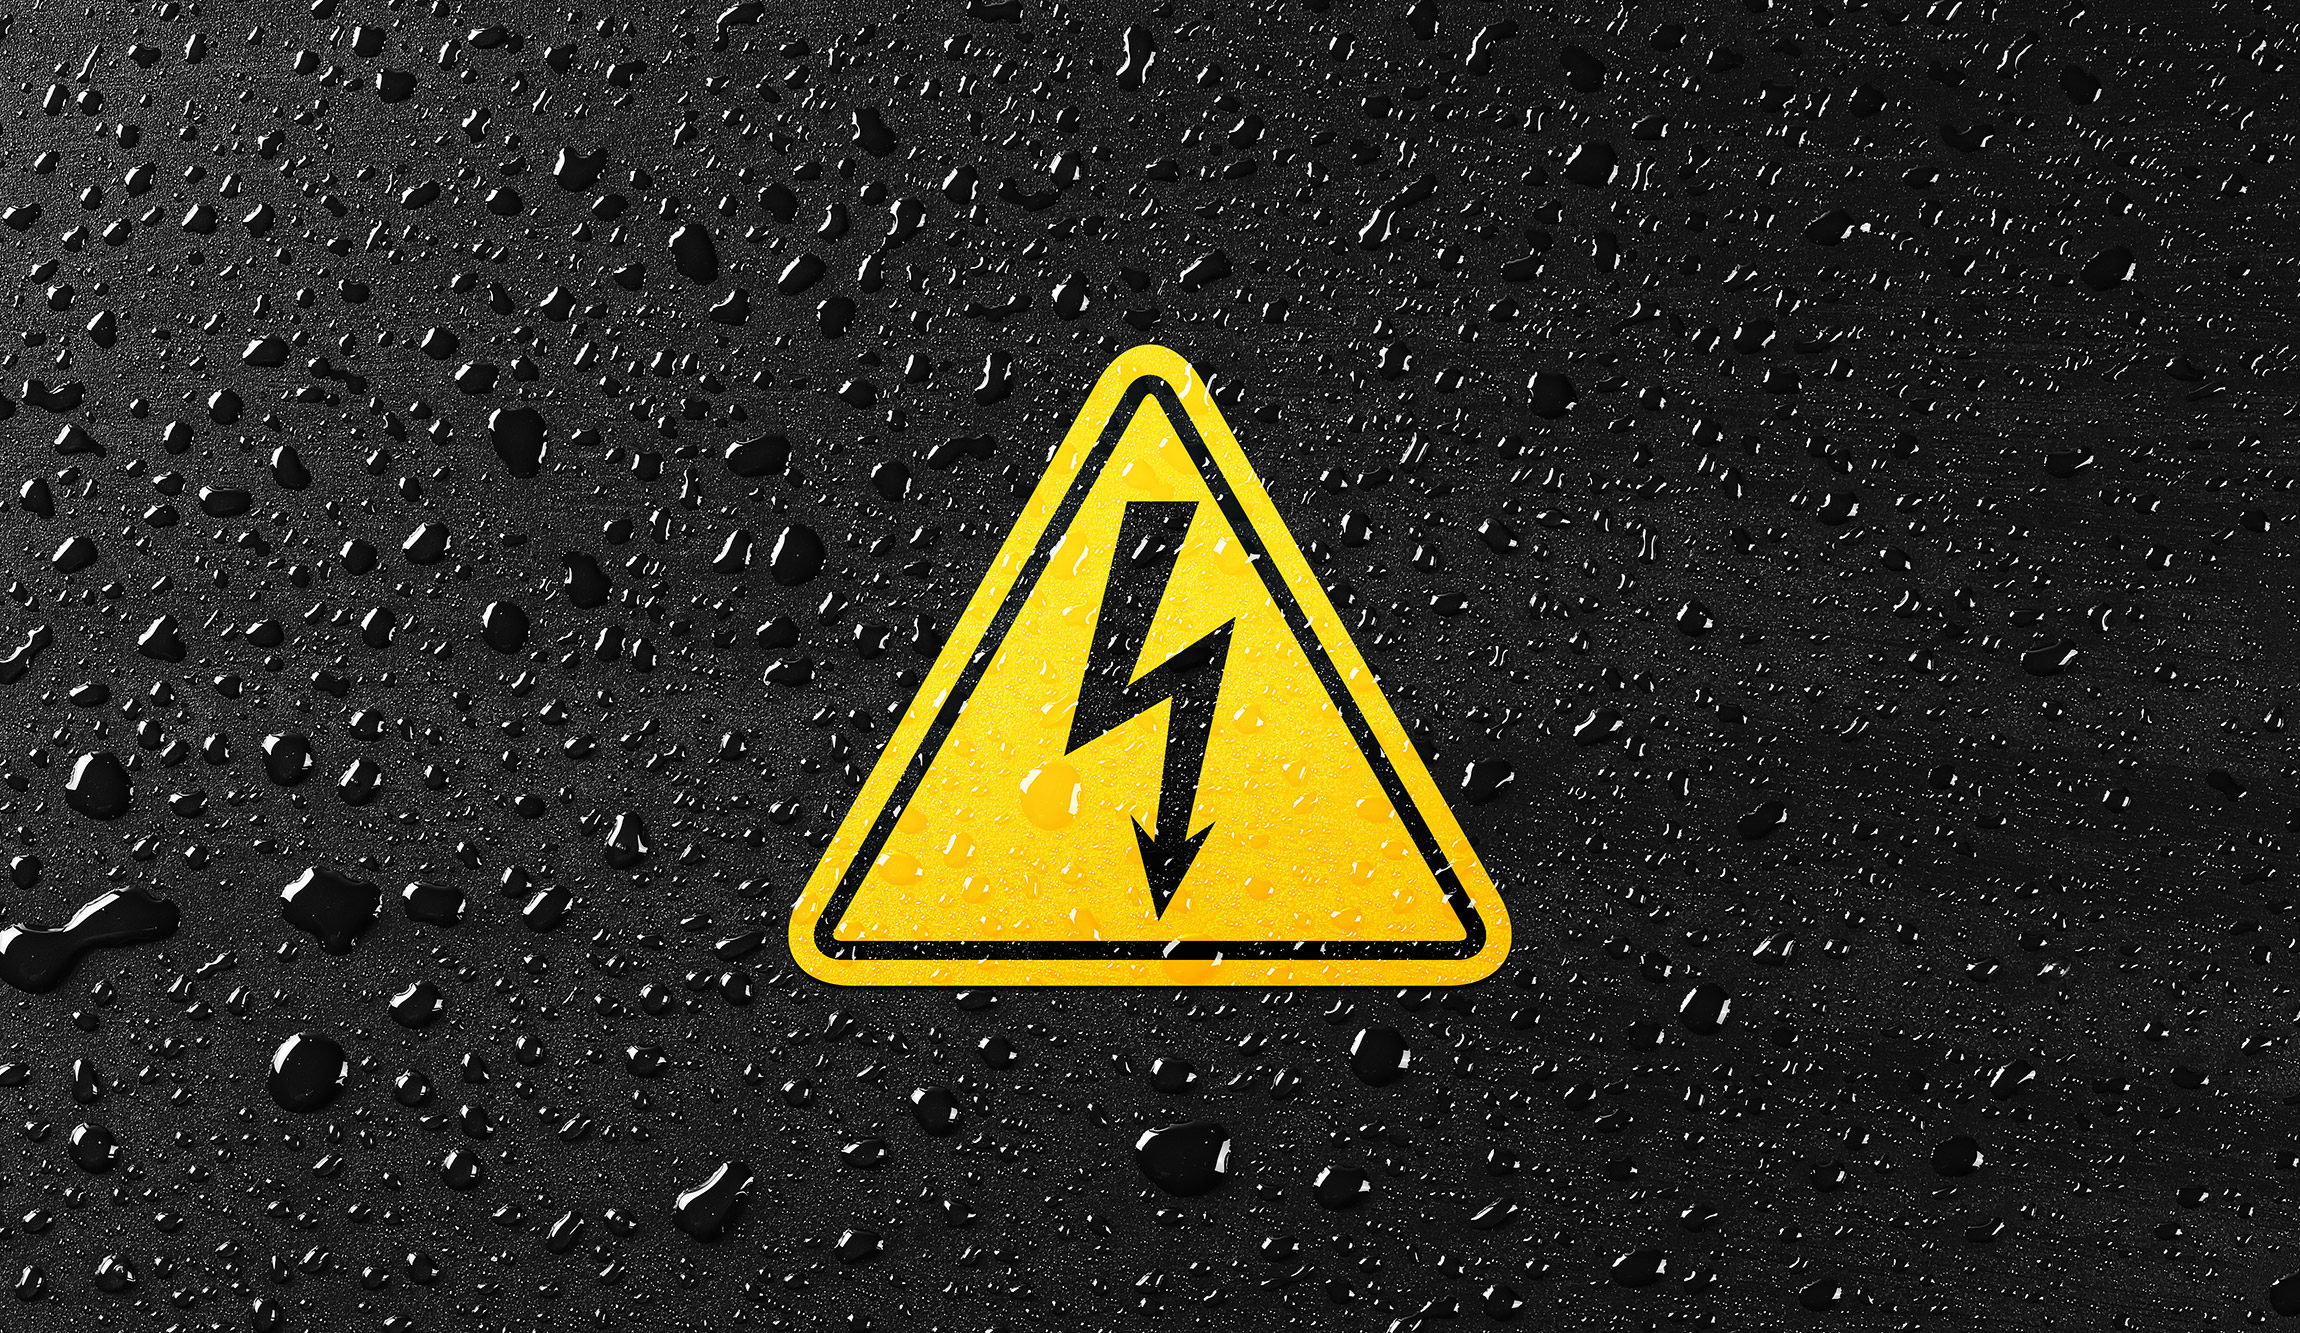 Condensation with electrical warning sign 